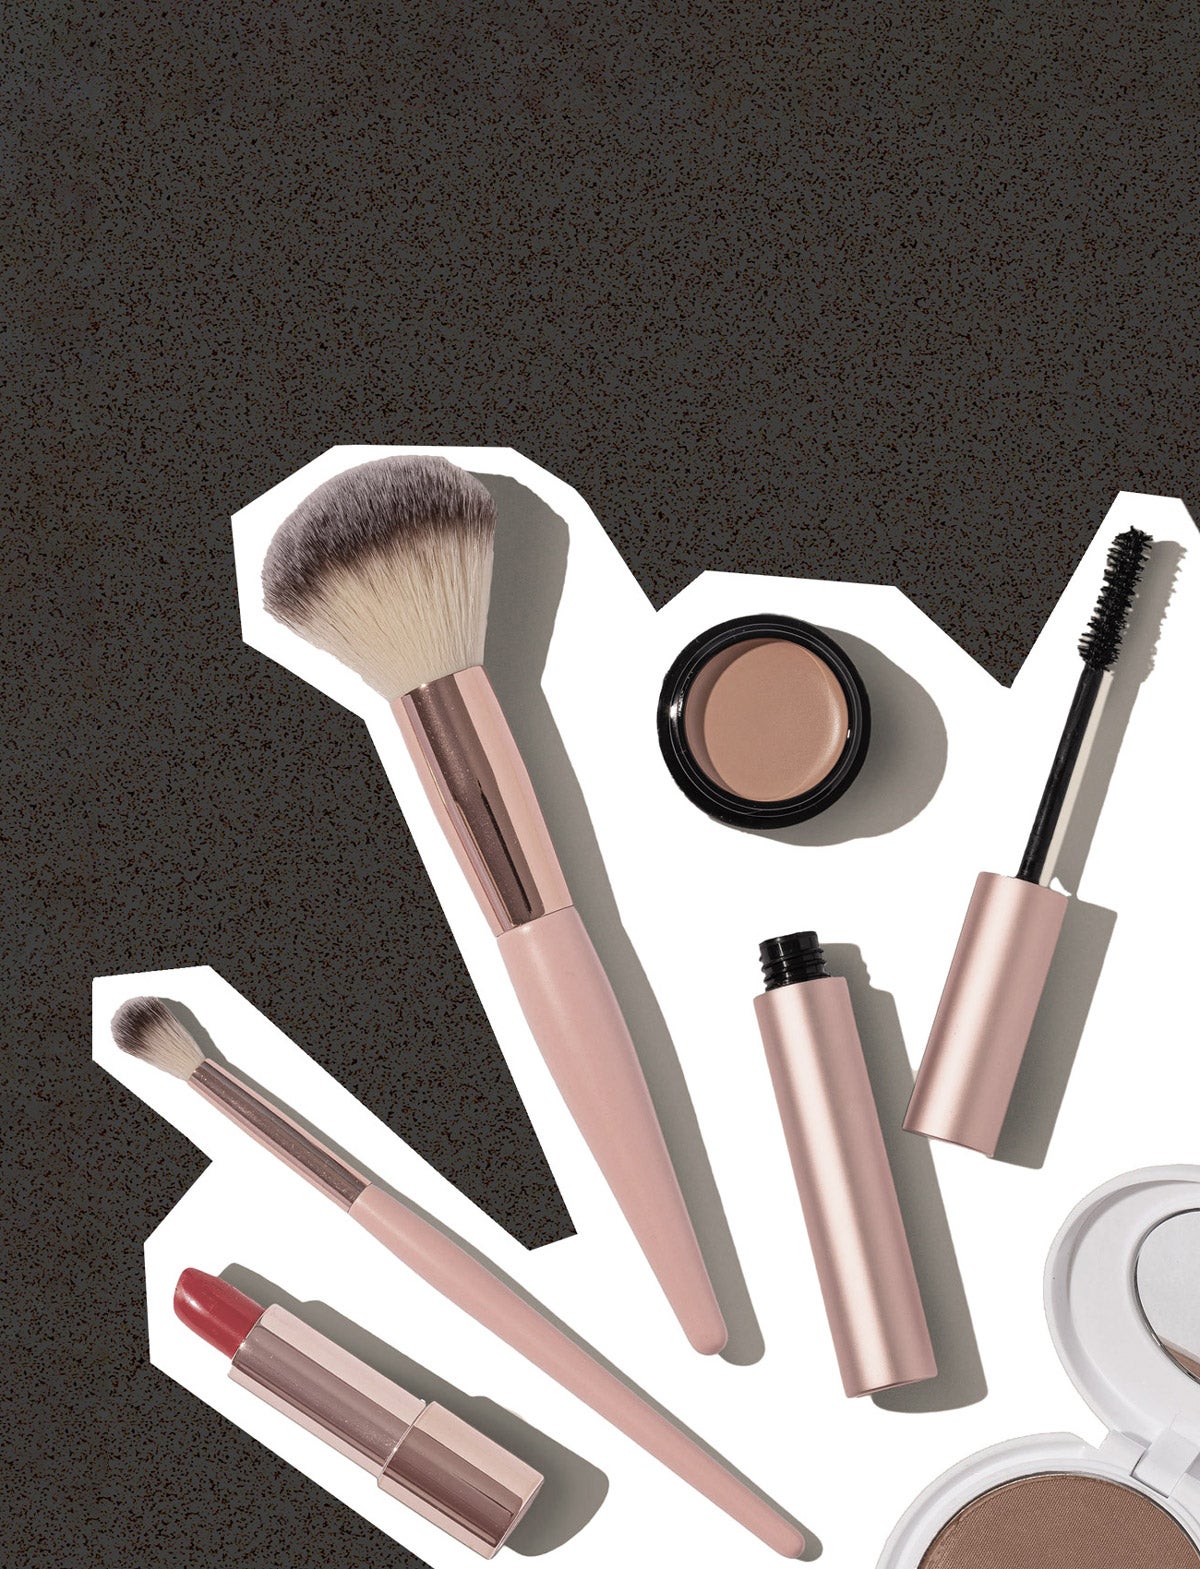 Miscellaneous rose gold cosmetic products are placed against a grey-speckled background.